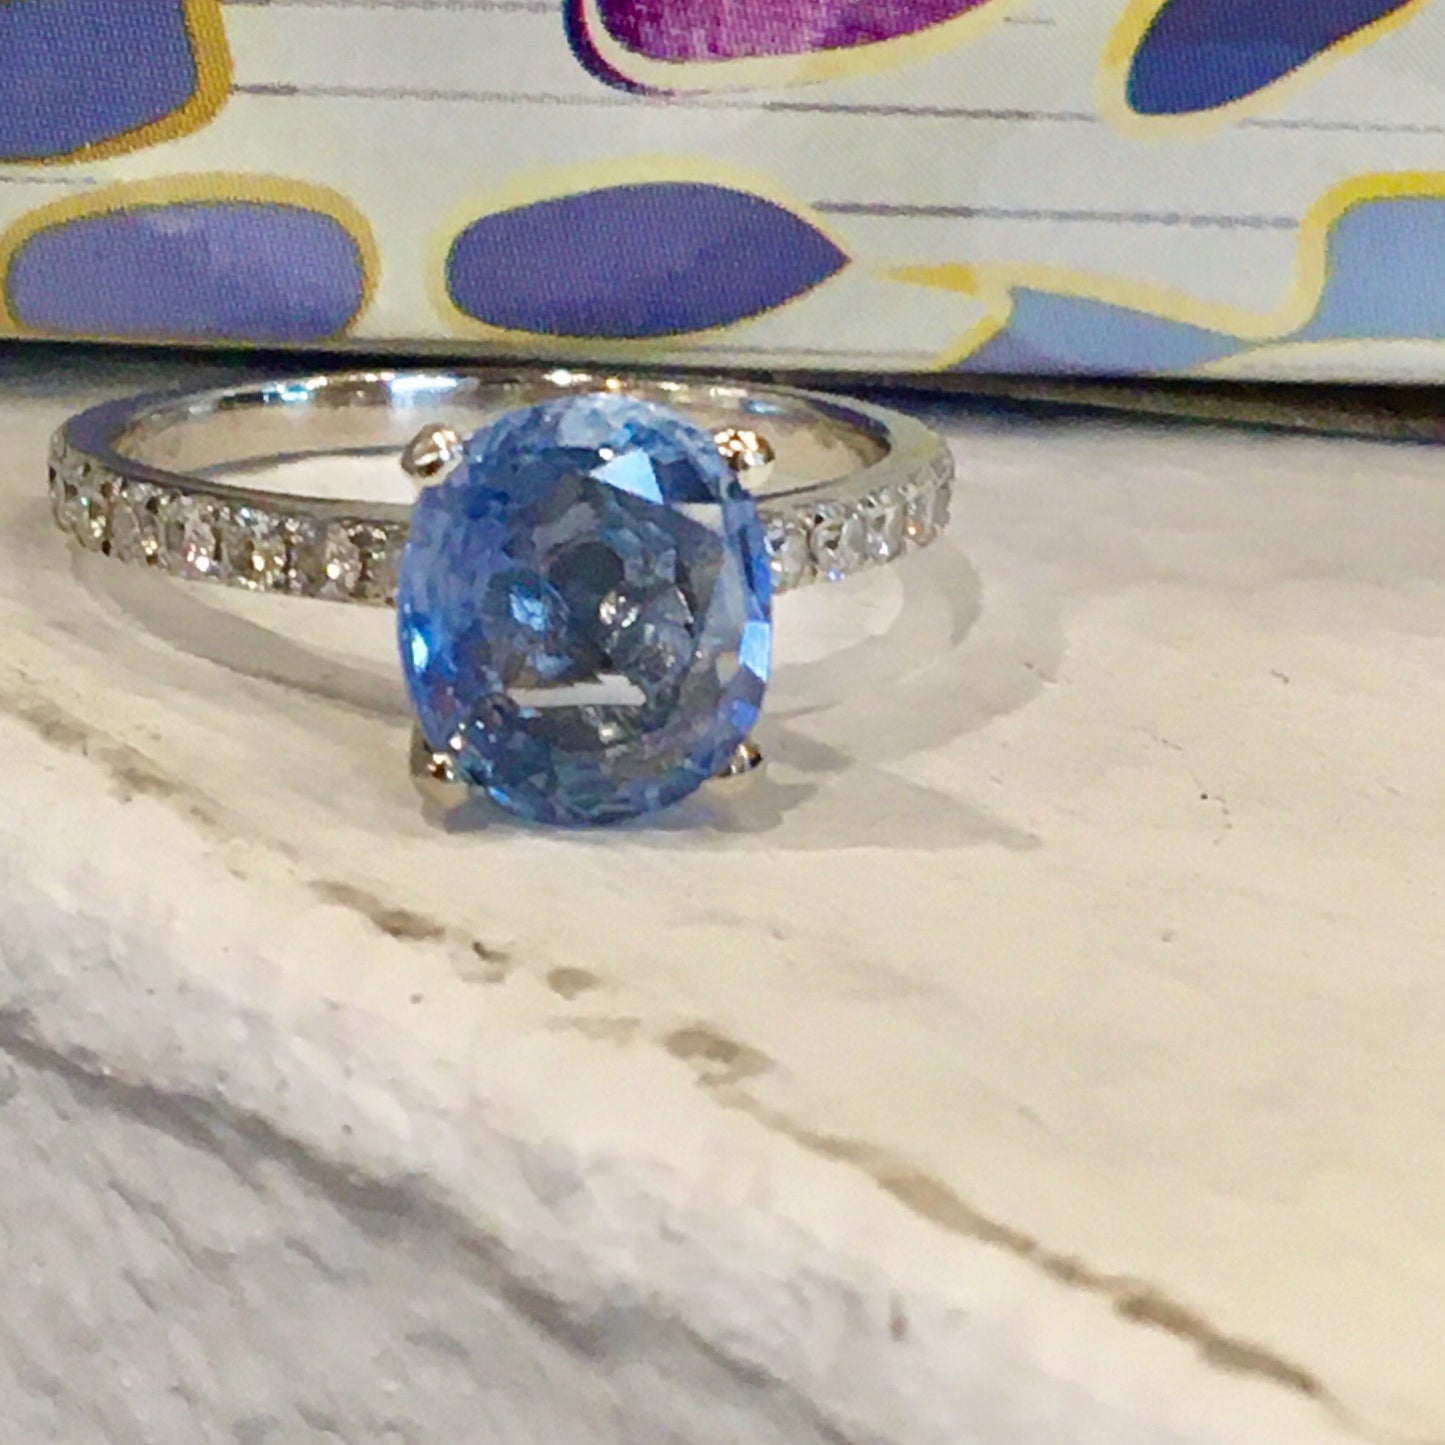 2.25 Carat Oval Sapphire Engagement Ring in Platinum